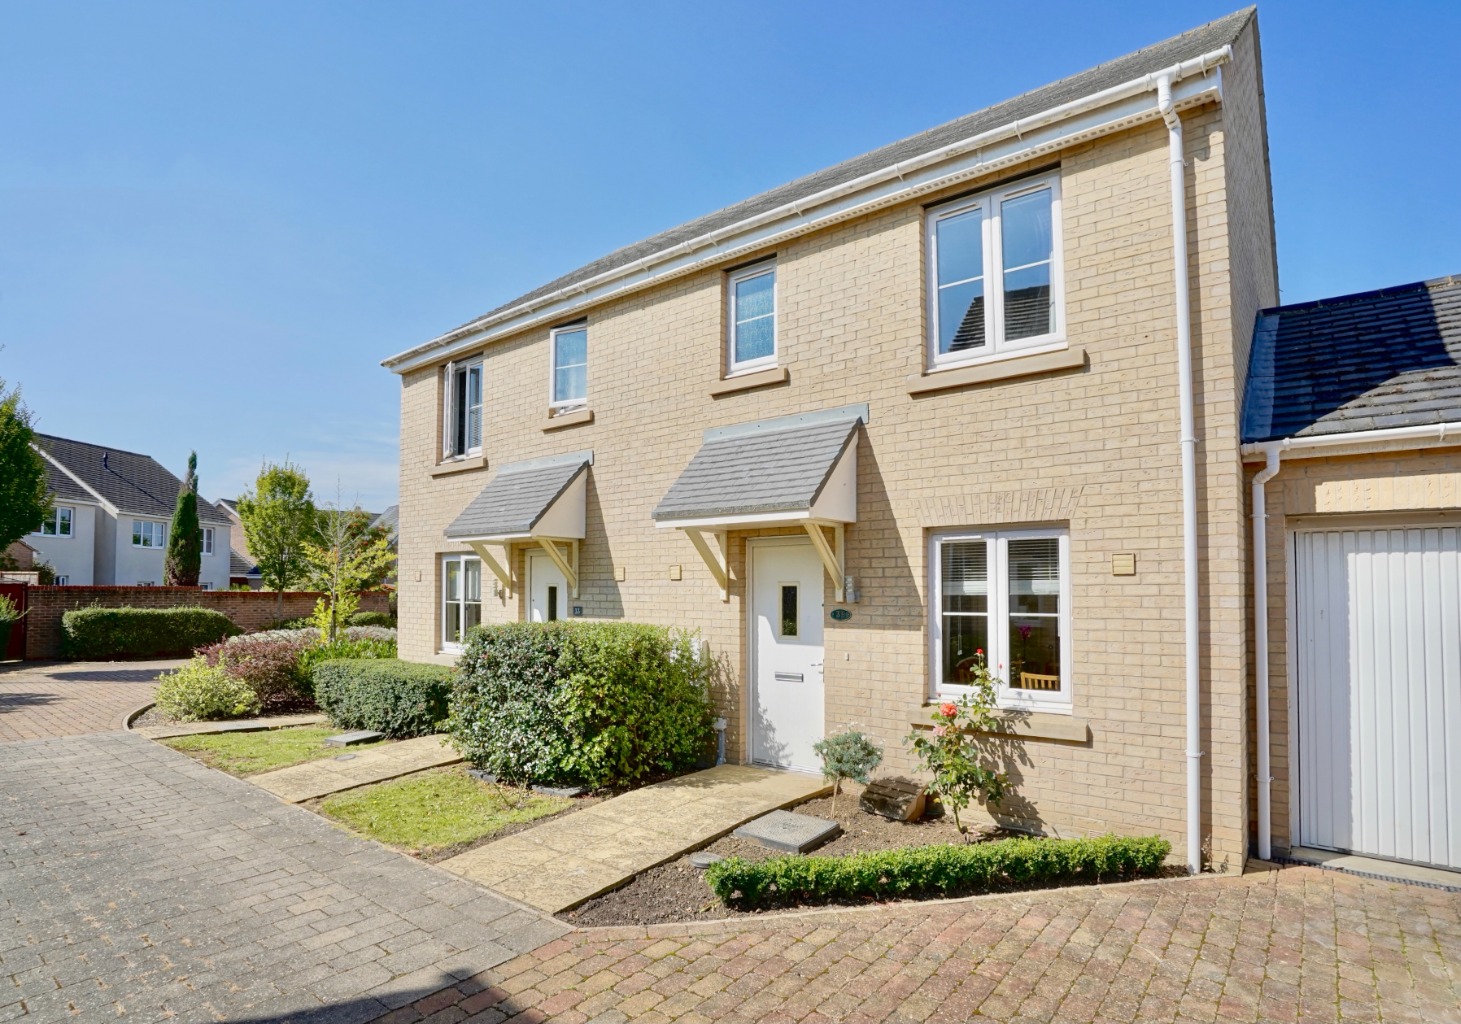 3 bed semi-detached house for sale in Fox Brook, St. Neots - Property Image 1